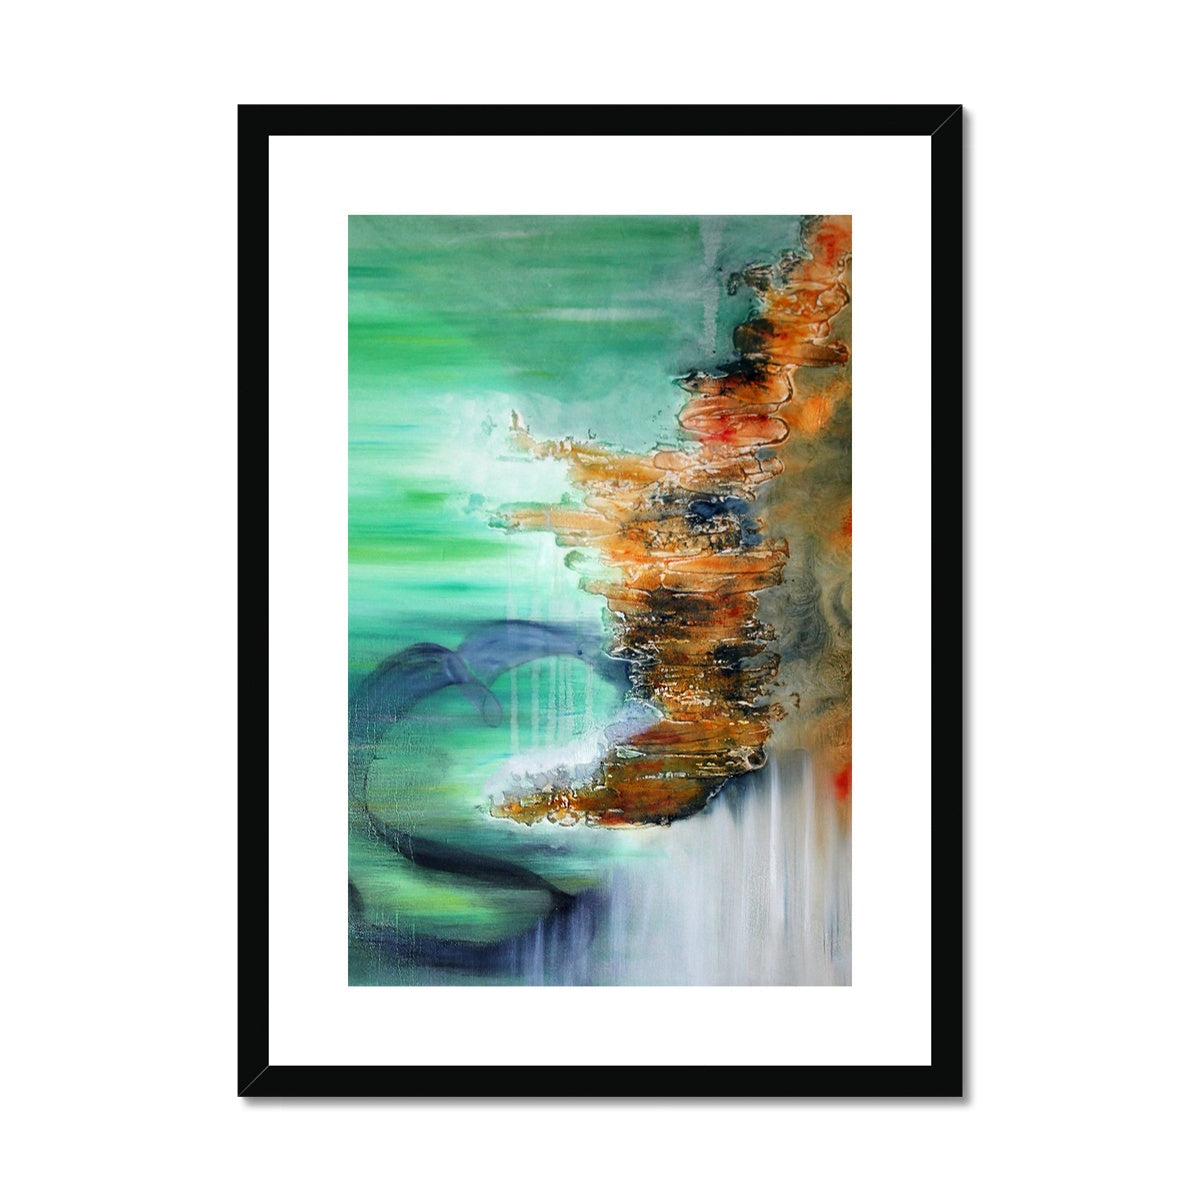 Lost Child |  Framed & Mounted Print